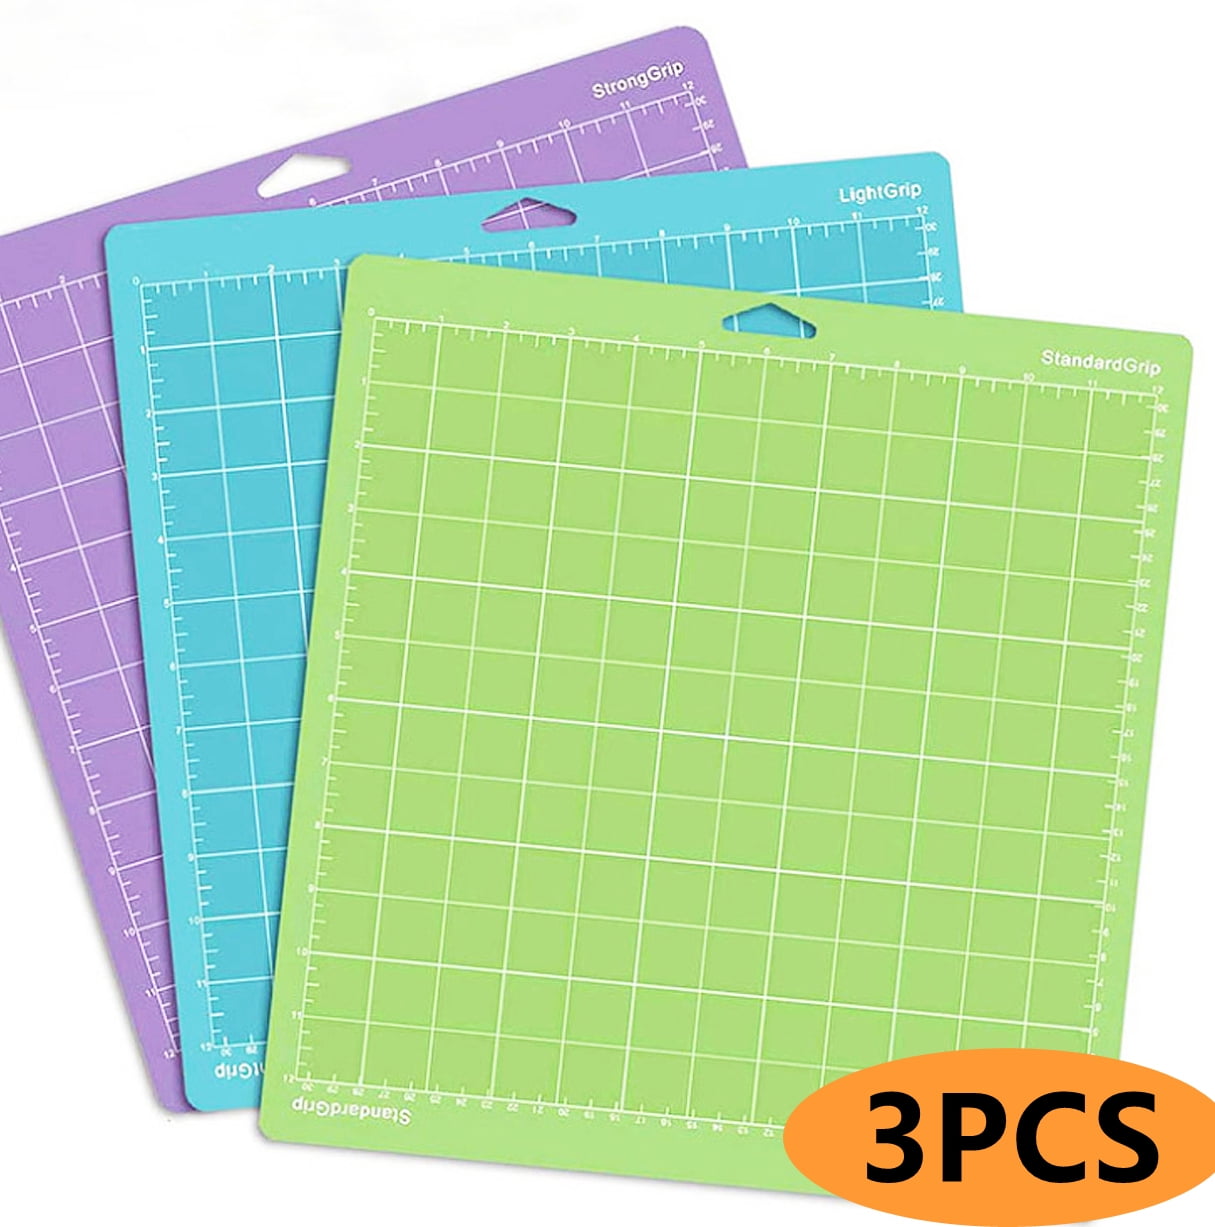 3pcs Lettering Pad Adhesive Cutting Pad for Cricut Pvc Die-Cutting Machine  Pads Variety Adhesive Vinyl Accessories